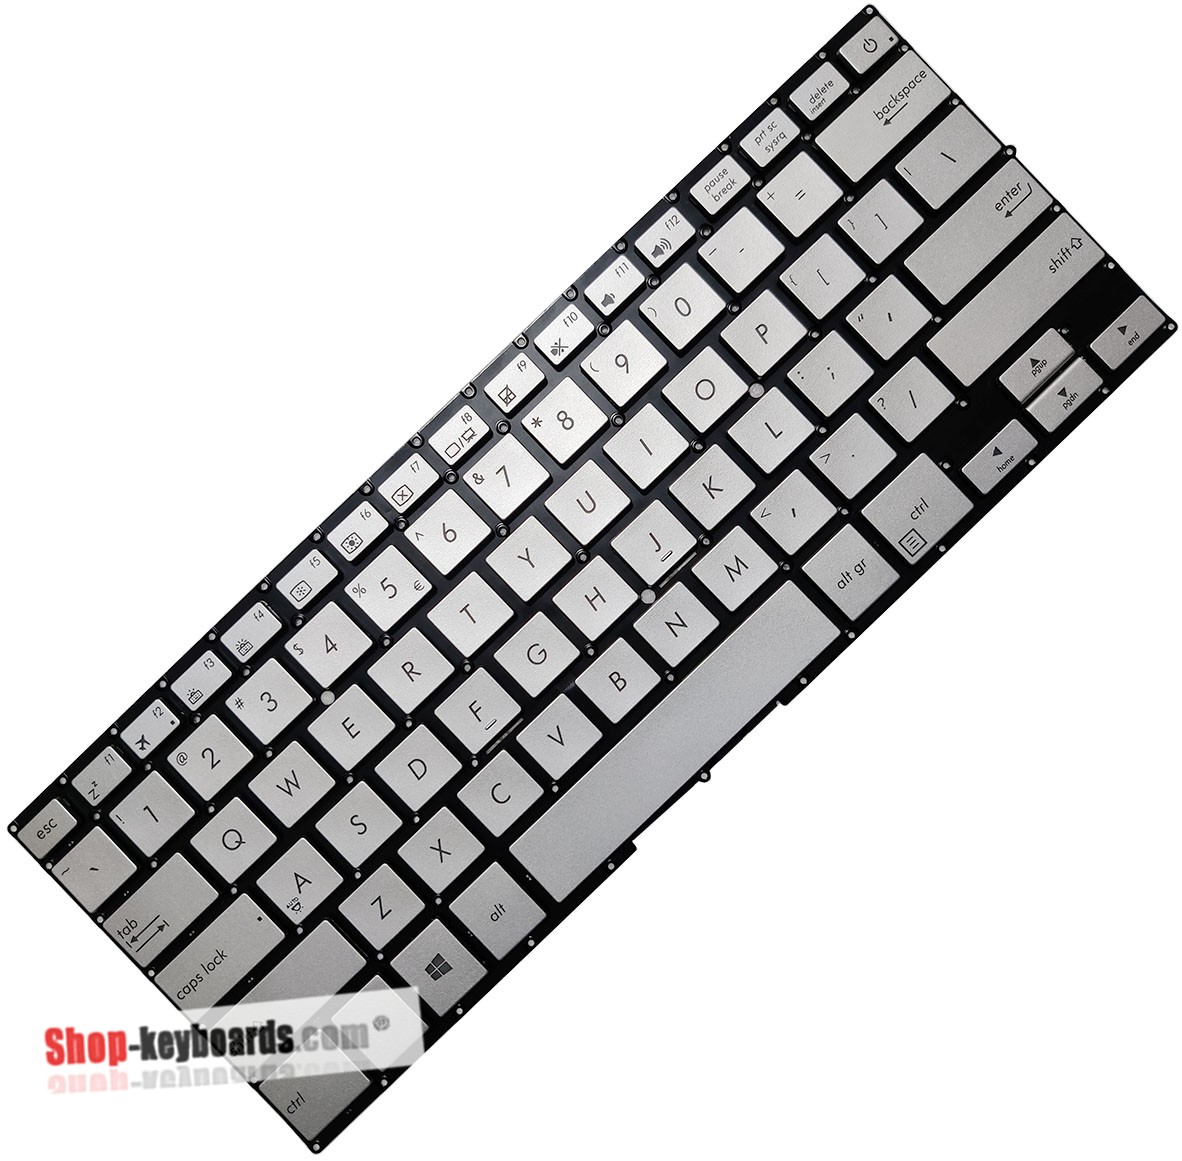 Asus 0KNB0-D620IT00 Keyboard replacement